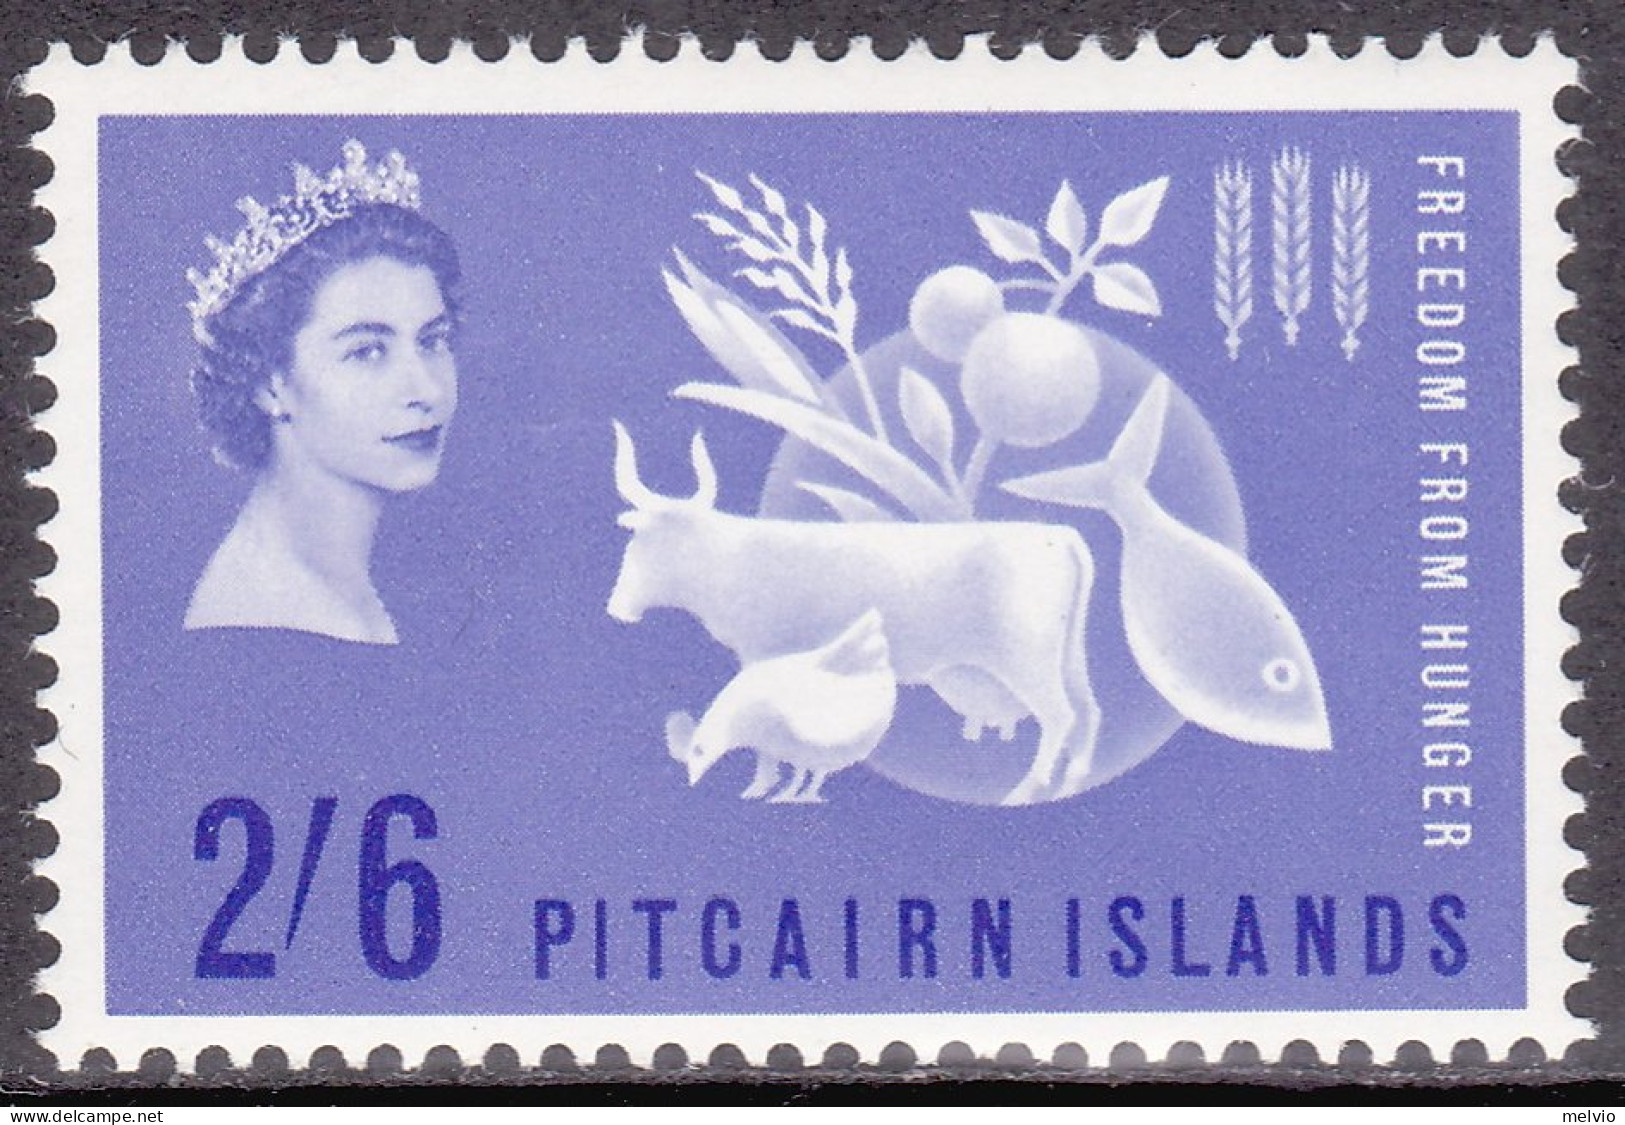 1963-Pitcairn Isole (MNH=**) S.1v."Campagna Contro La Fame" - Pitcairn Islands